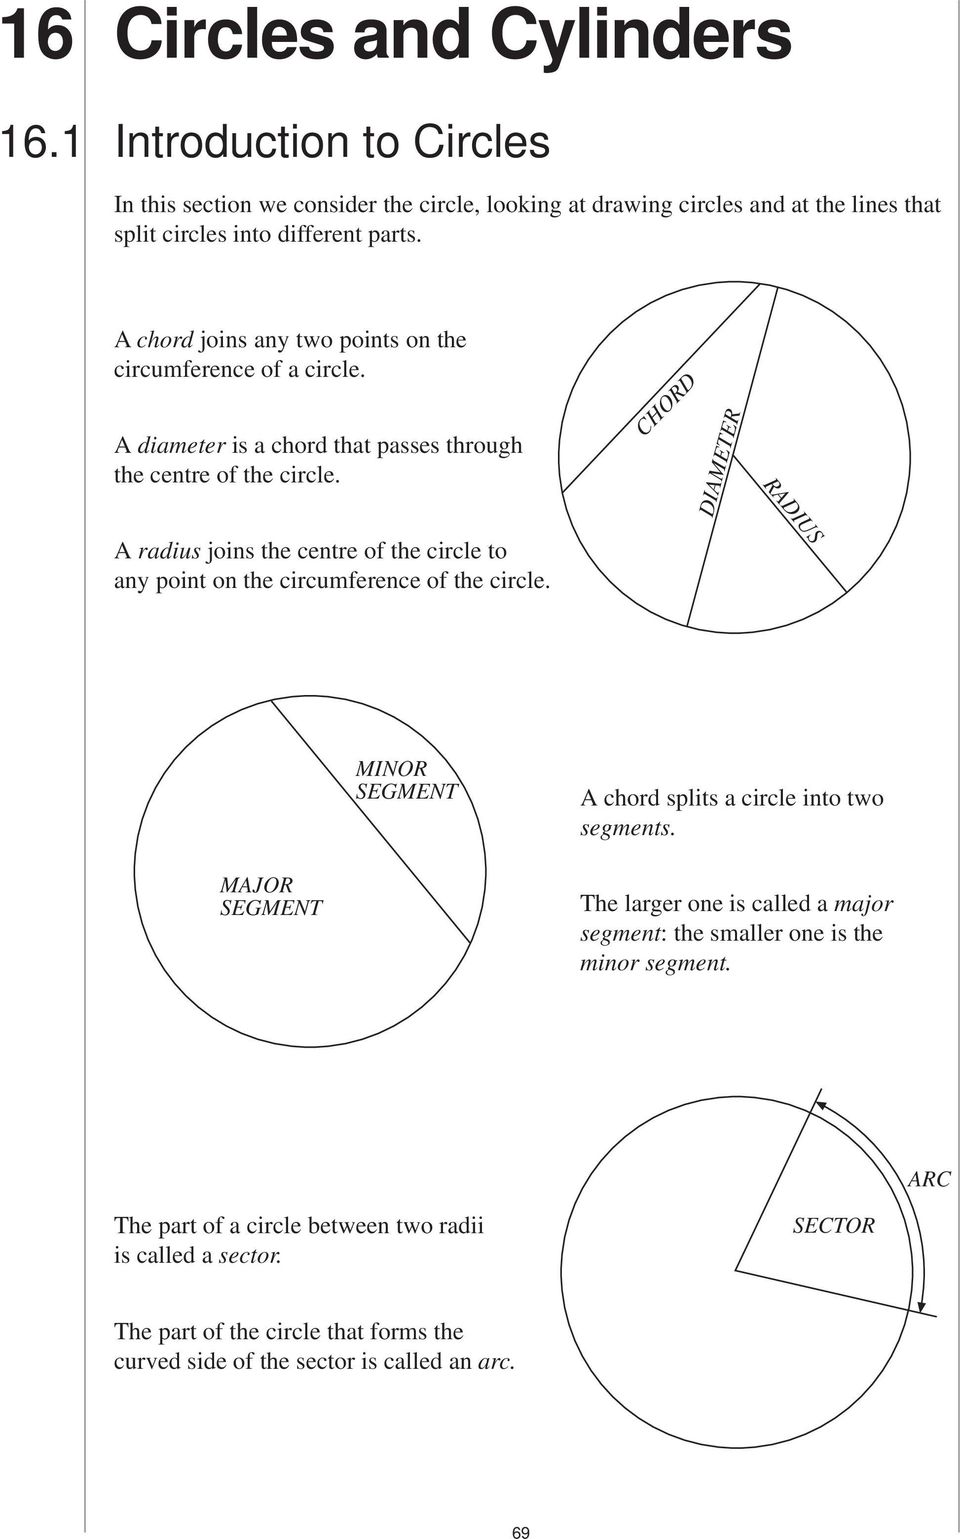 CHORD DIAMETER RADIUS A radius joins the centre of the circle to any point on the circumference of the circle. MINOR SEGMENT A chord splits a circle into two segments.